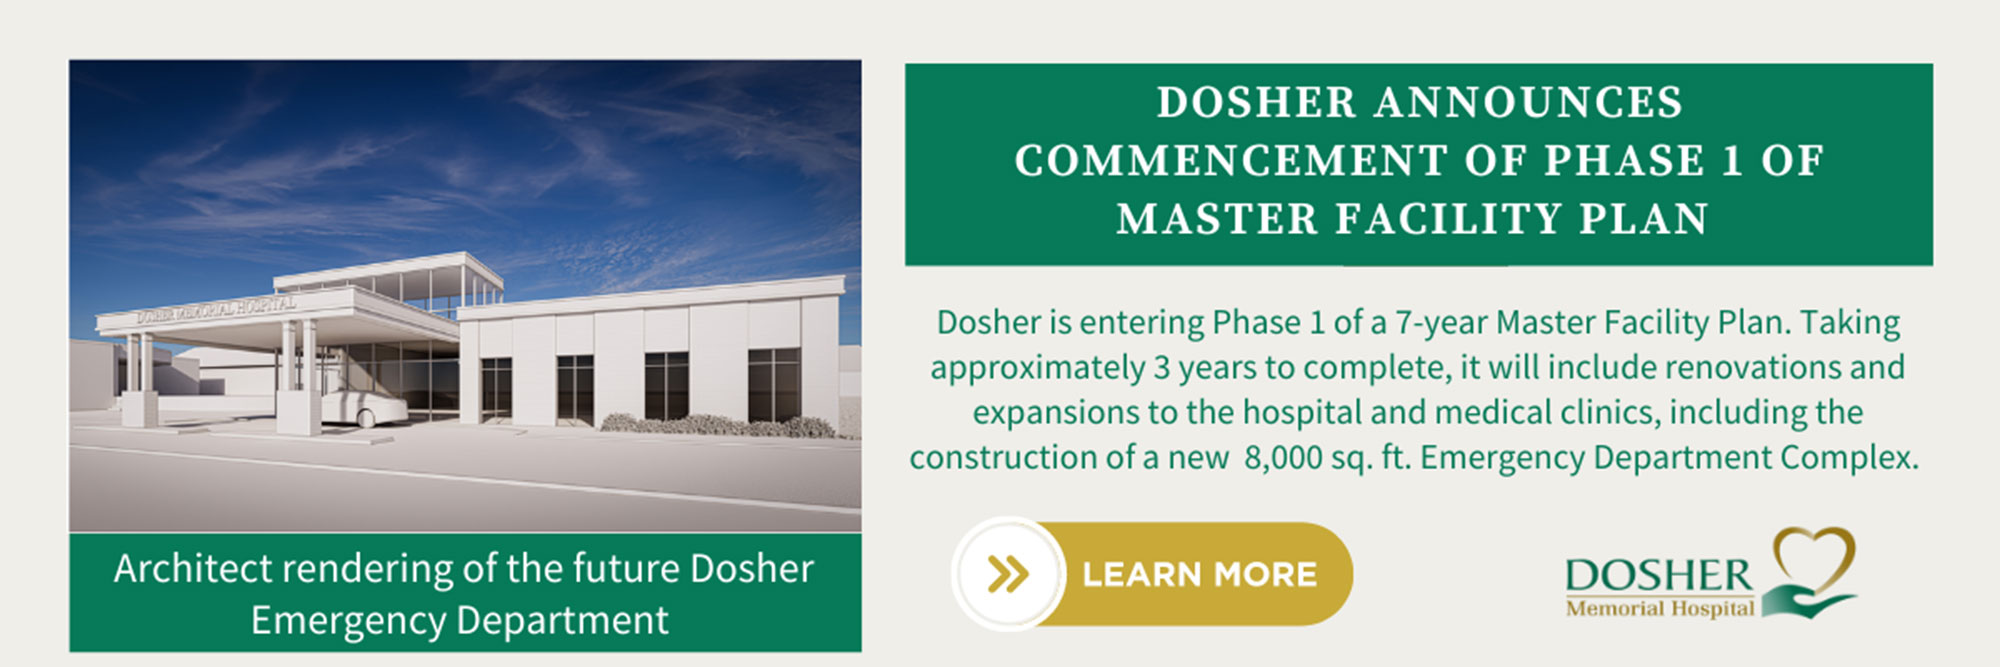 Picture of architect rendering of the future Dosher Emergency Department. Dosher announces commencement of Phase 1 of master facility plan.